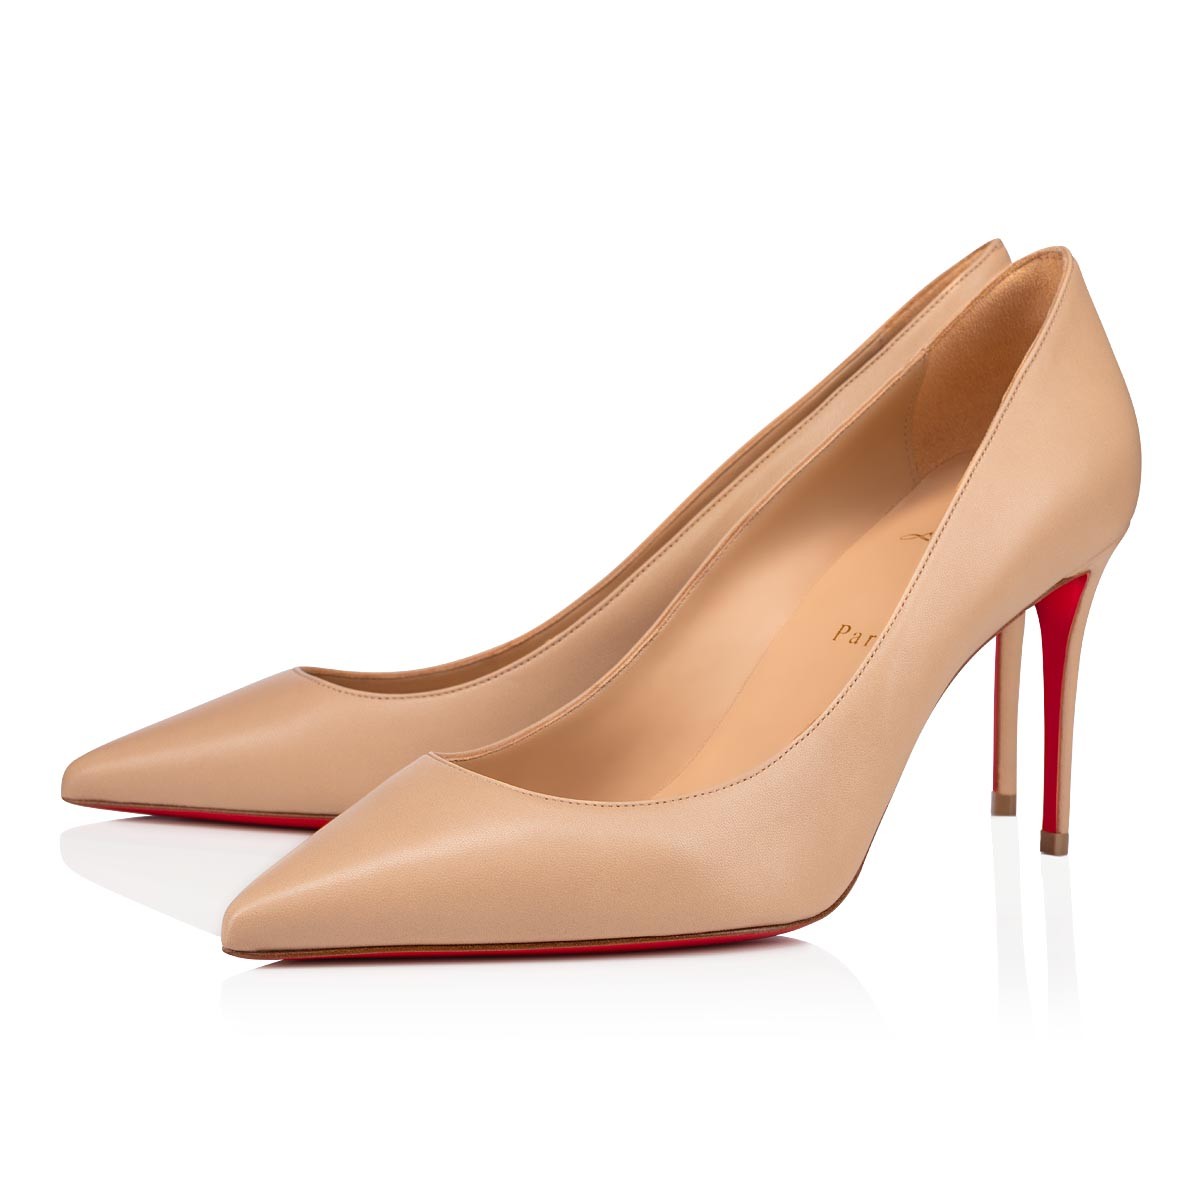 Kate 85 mm Pumps Nude Nappa Leather